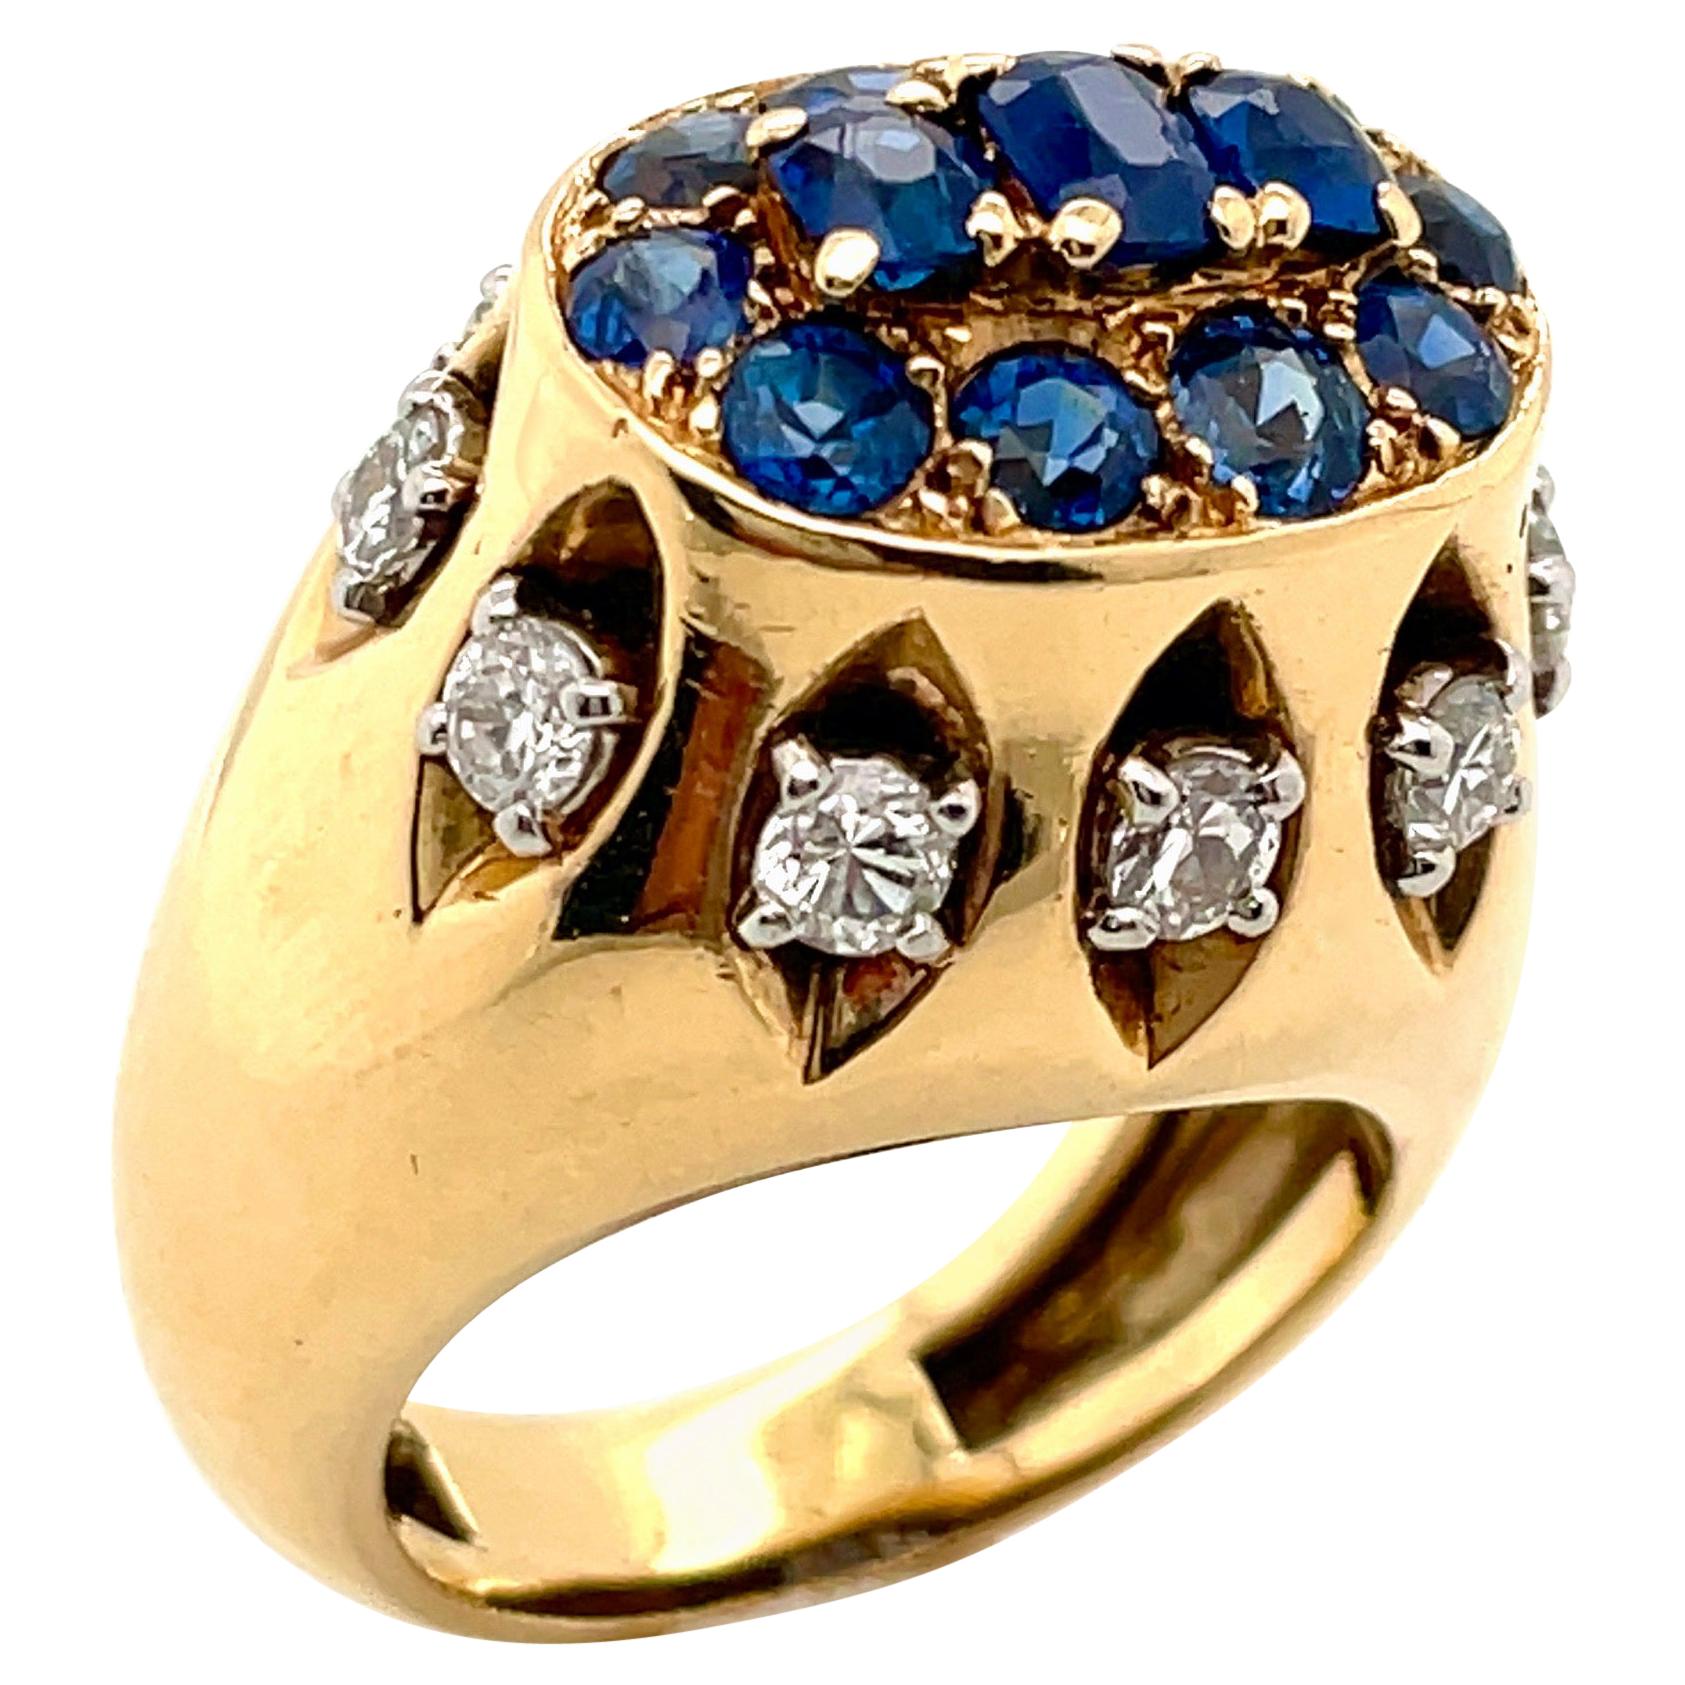 1960's Cartier France Diamond and Sapphire Ring